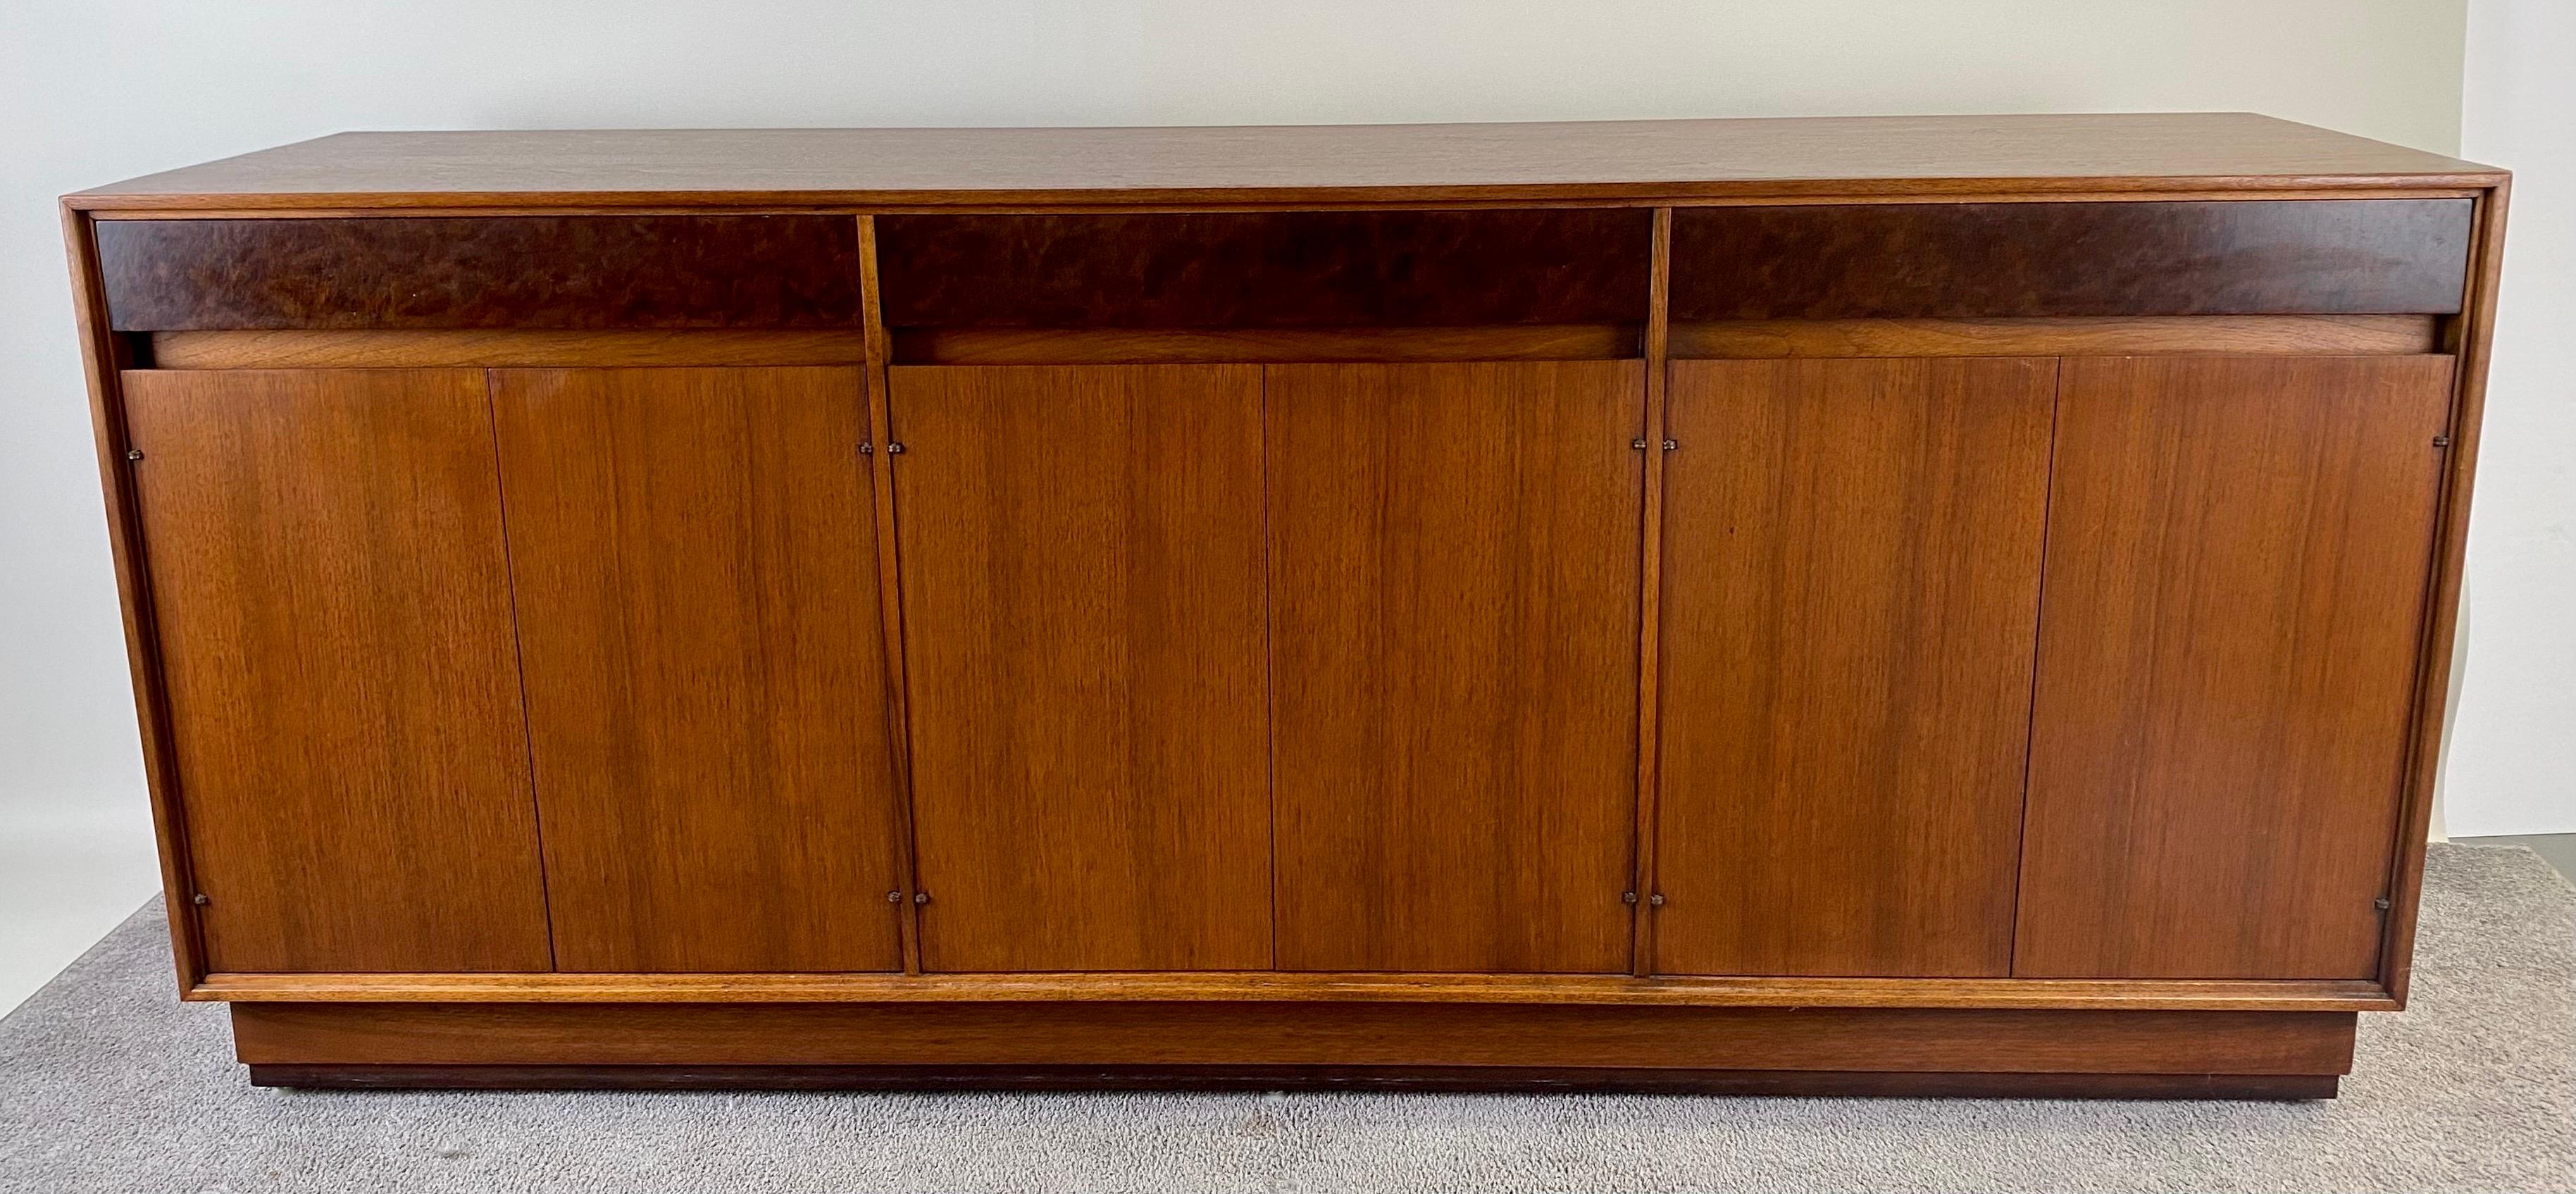 

A timeless John Stuart Mid-Century Modern Walnut and Burl Wood Sideboard Credenza. Designed by the MCM icon John Stuart , the sideboard is finely crafted by the renowned Mount  Airy Chair Company. The quality credenza features three drawer fronts